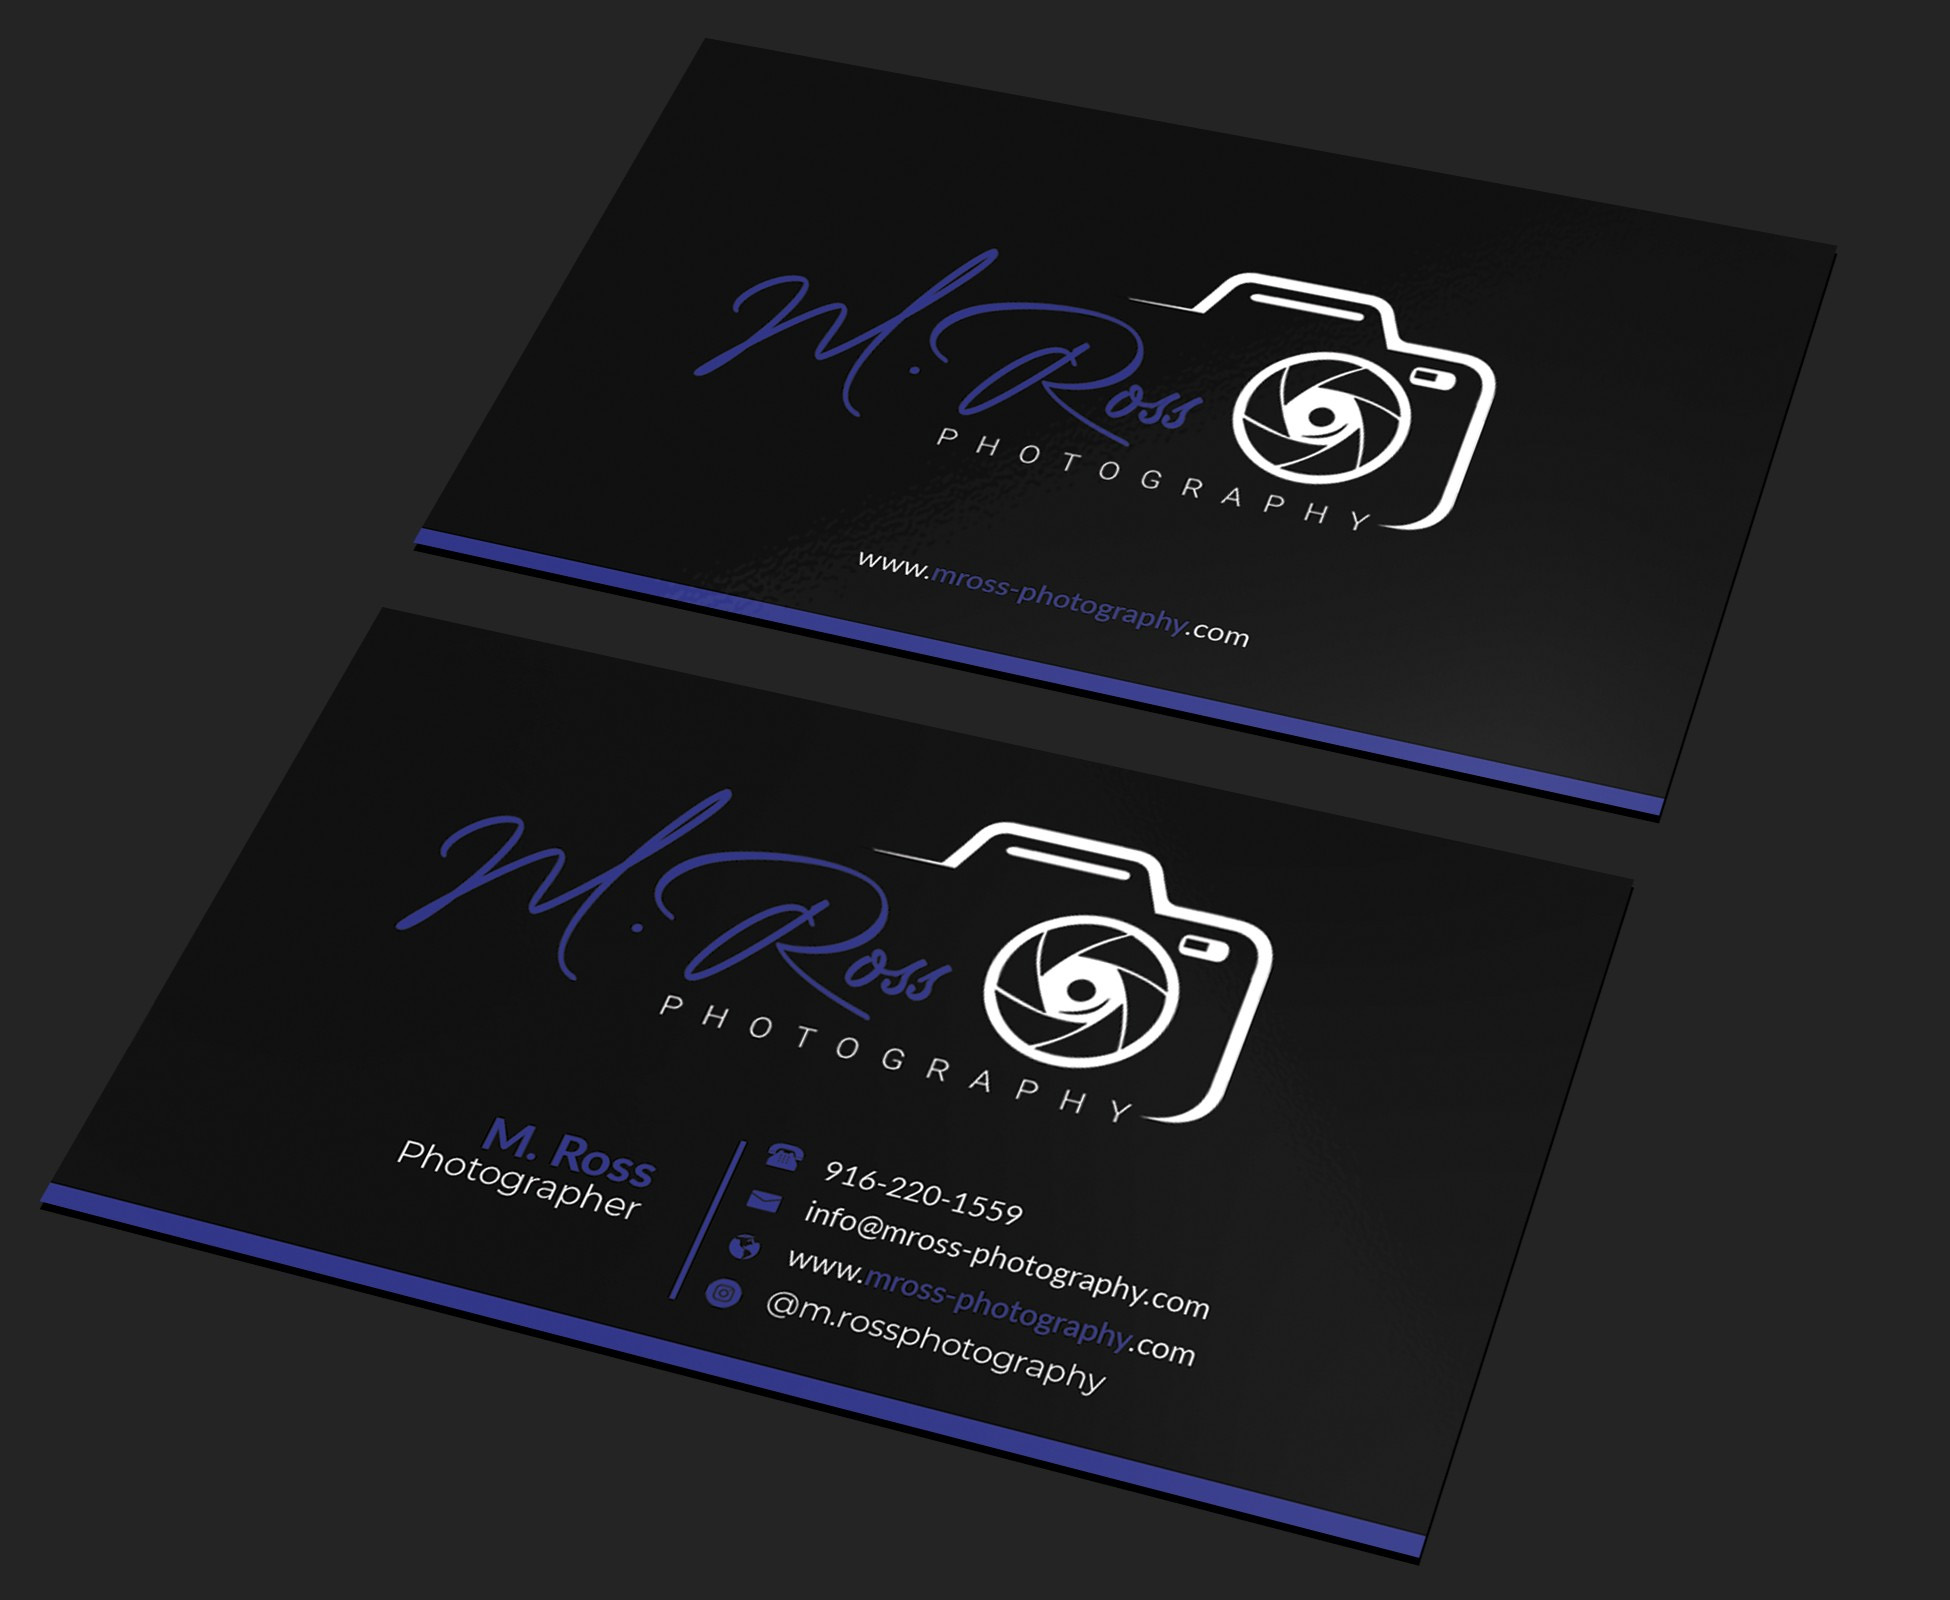 I will design professional and unique business card